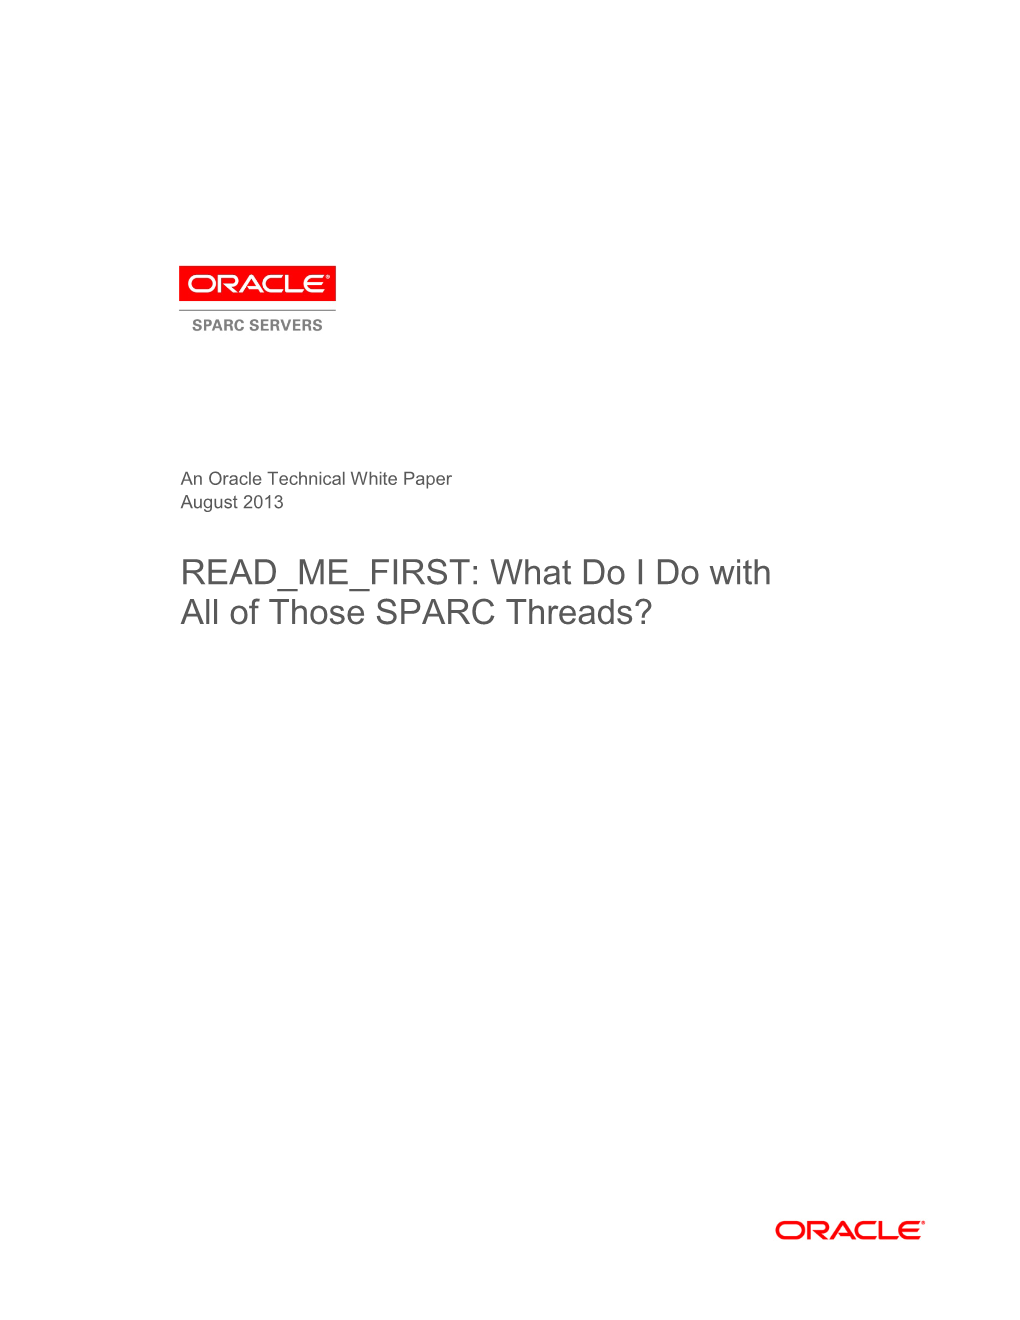 READ ME FIRST: What Do I Do with All of Those SPARC Threads?